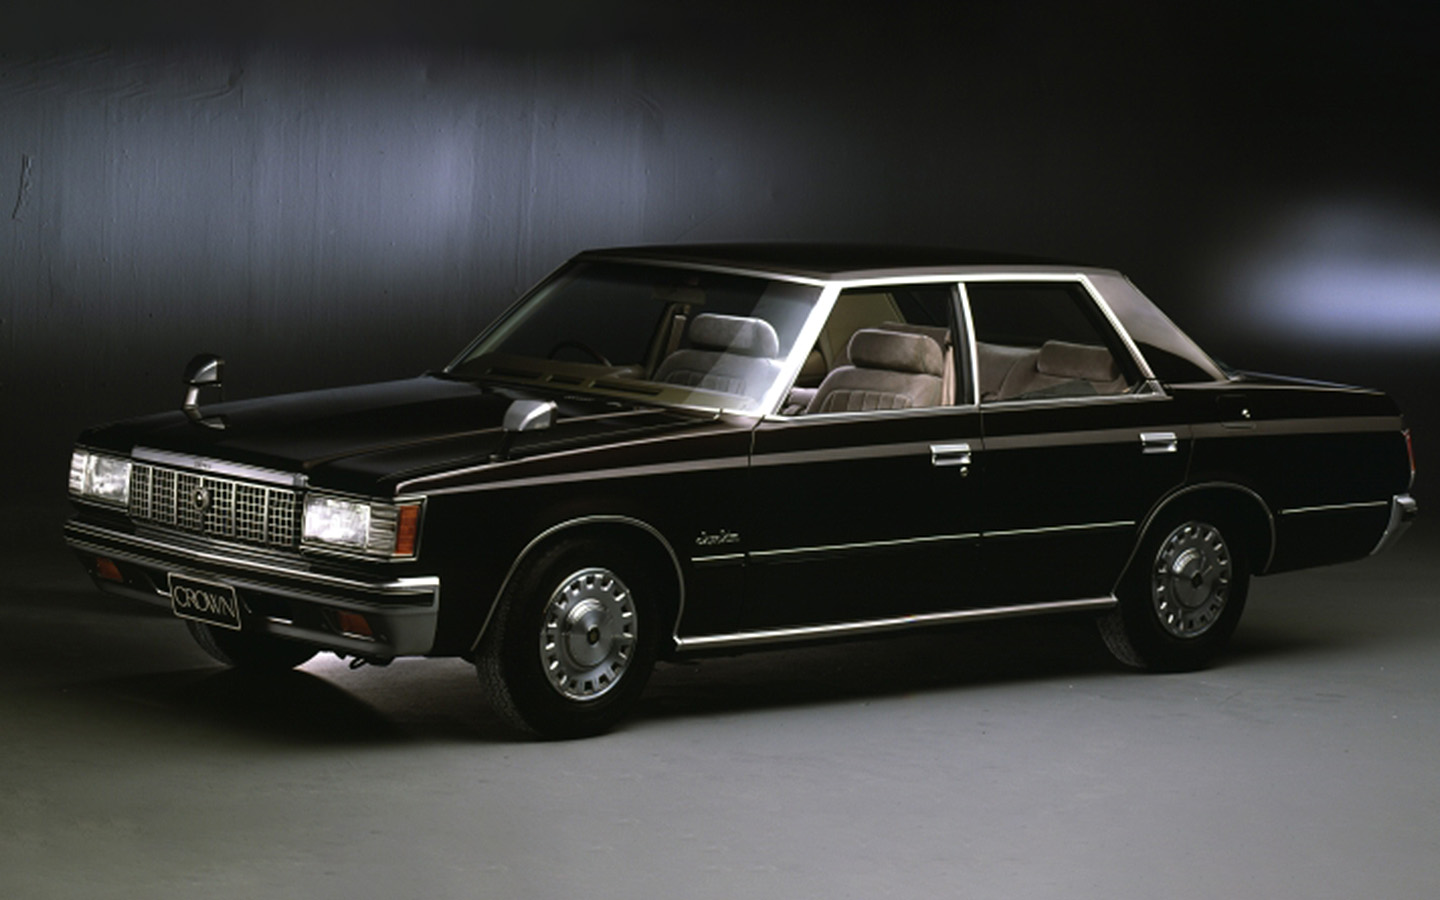 Sixth generation Toyota crown 1979 had five body styles